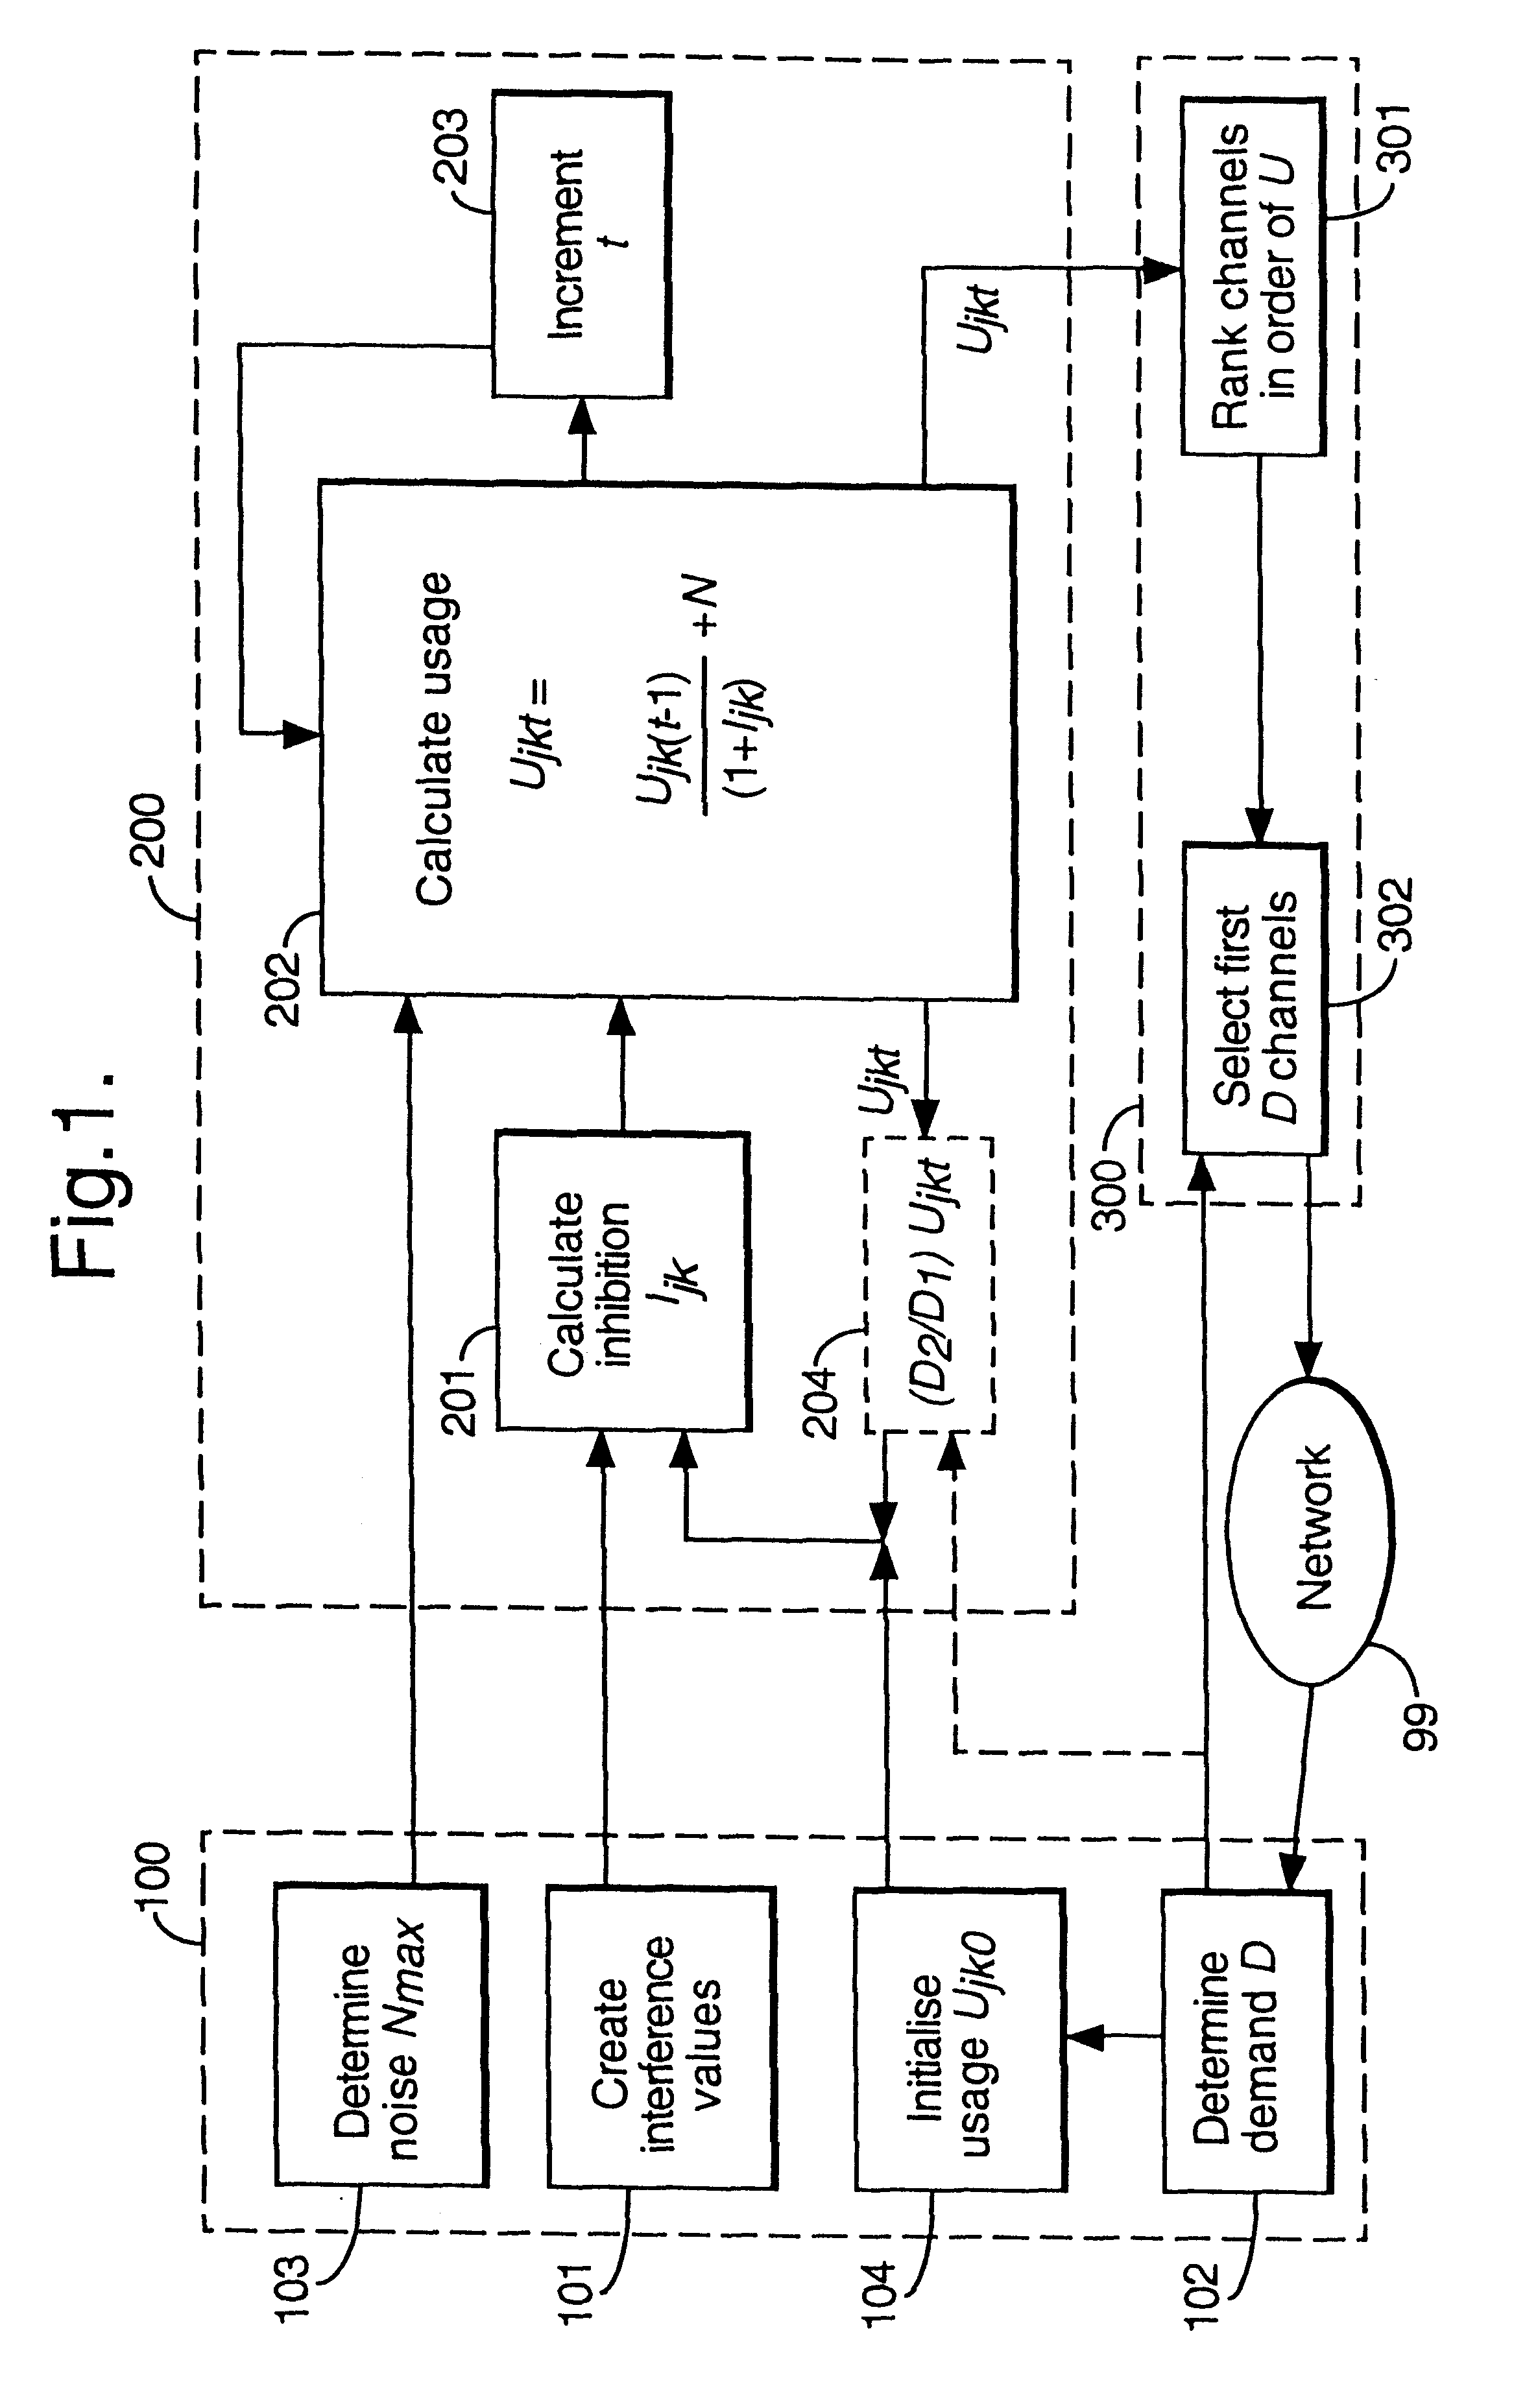 Channel allocation in cellular telephony